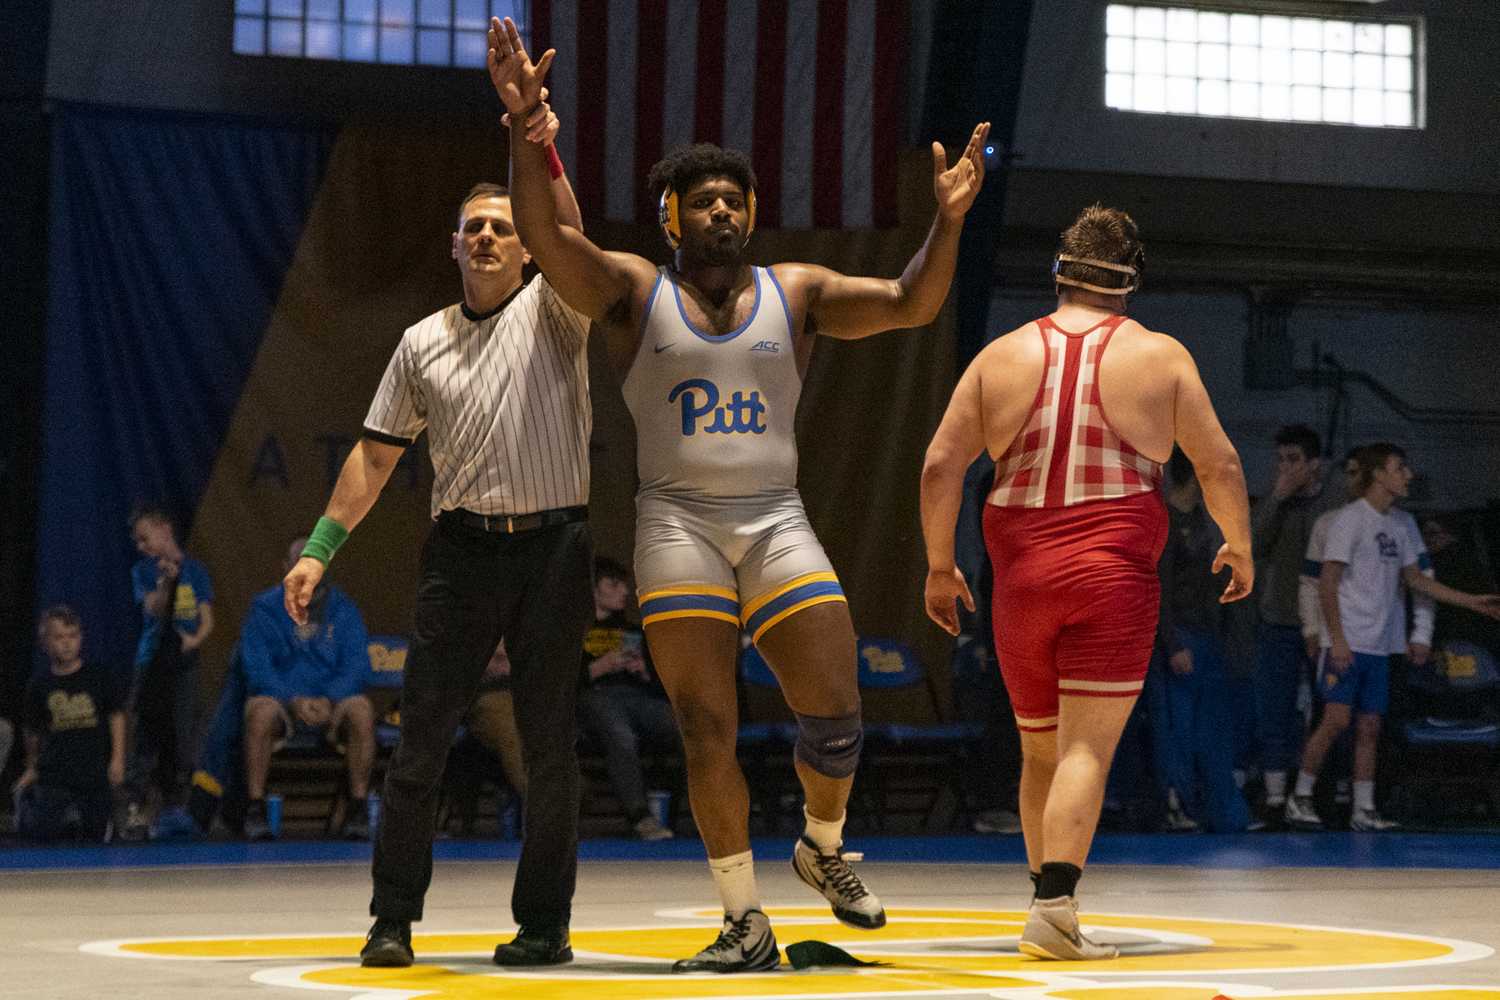 Pitt wrestling earns trio of No. 1 seeds in ACC Tournament - The Pitt News